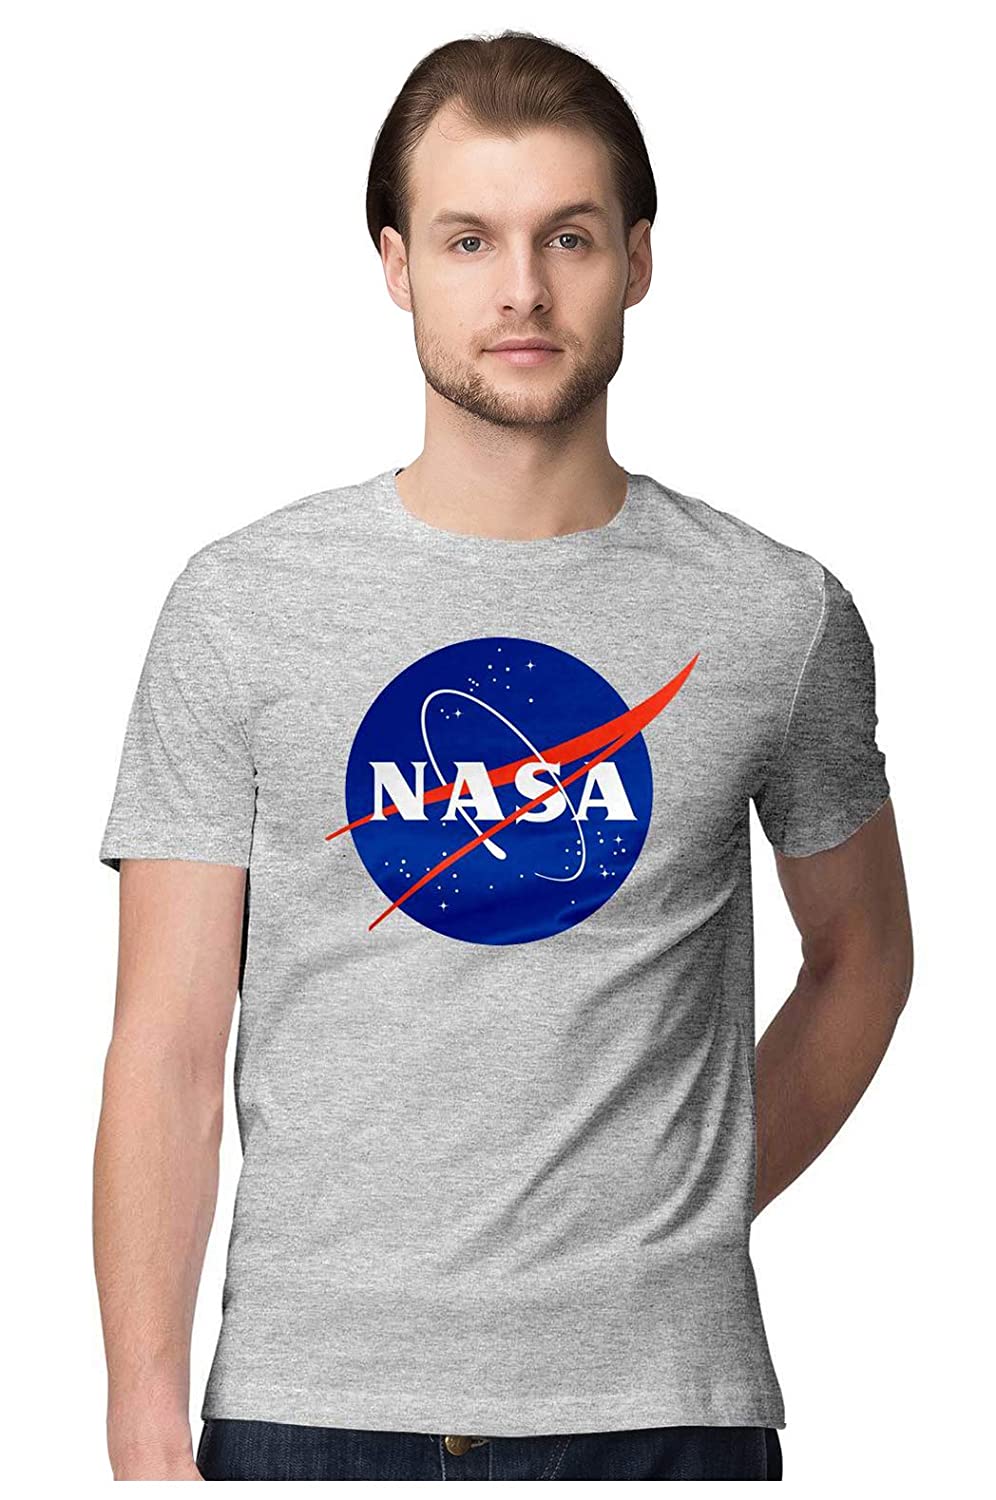 iberry's Printed T-Shirt for Men |Funny Quote Tshirt | Half Sleeve T shirts | Round Neck T Shirt |Cotton T-Shirt for Men- Nasa